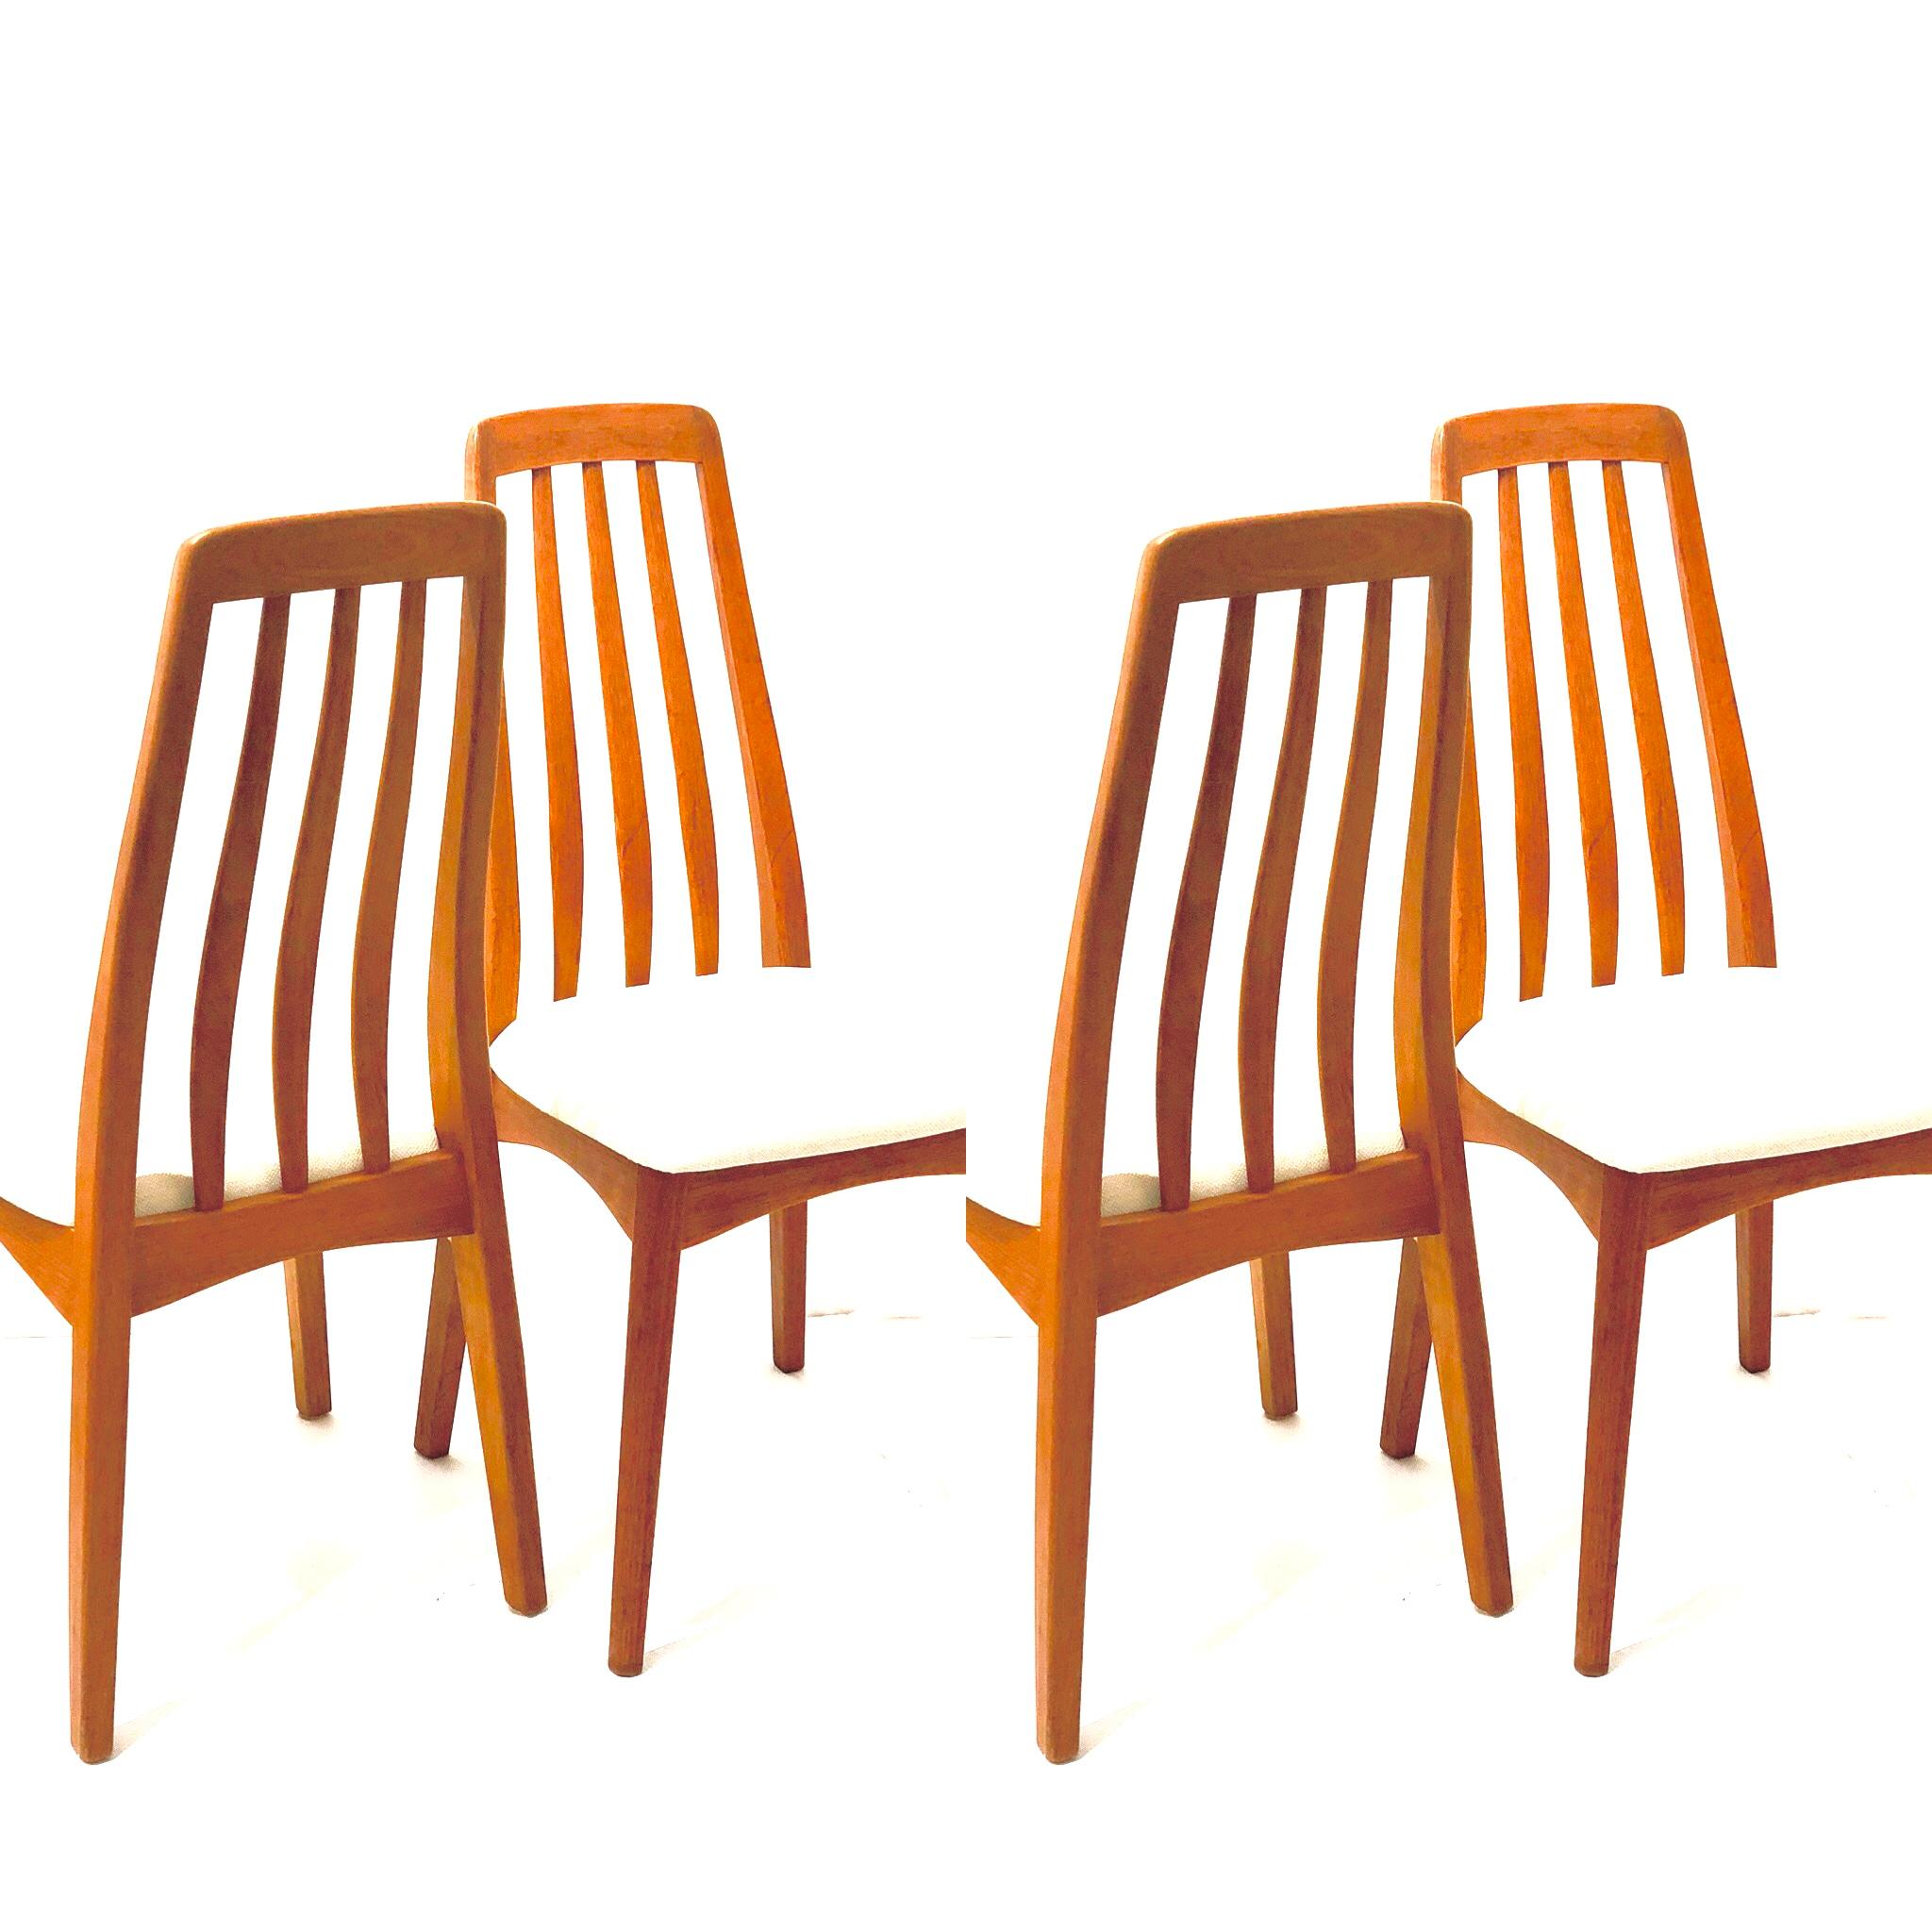 Beautiful elegant tall back set of four chairs in solid teak, circa 1970s solid and sturdy frames in great condition with new cream color fabric seat pads.